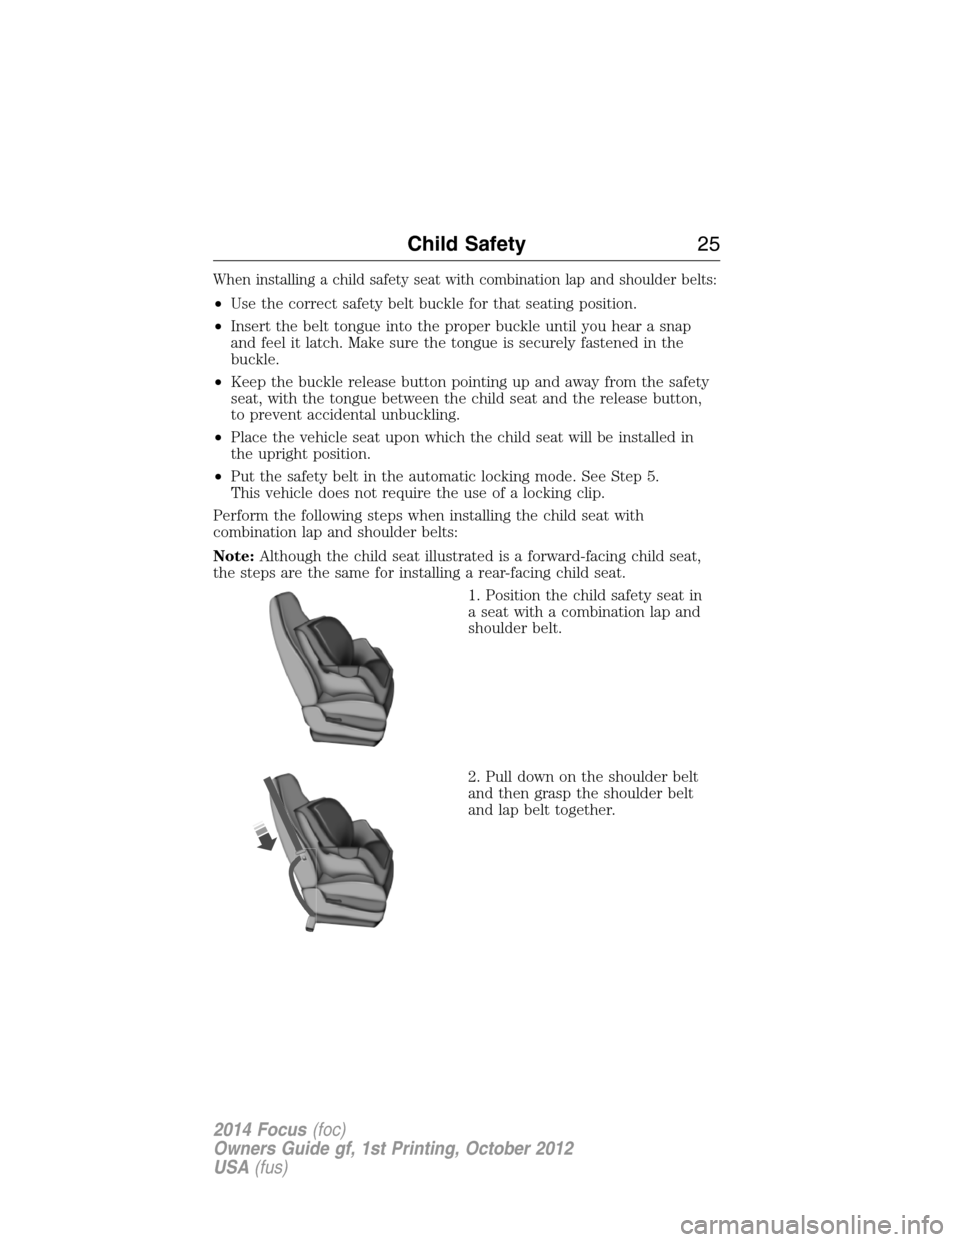 FORD FOCUS 2014 3.G Owners Manual When installing a child safety seat with combination lap and shoulder belts:
•Use the correct safety belt buckle for that seating position.
•Insert the belt tongue into the proper buckle until you